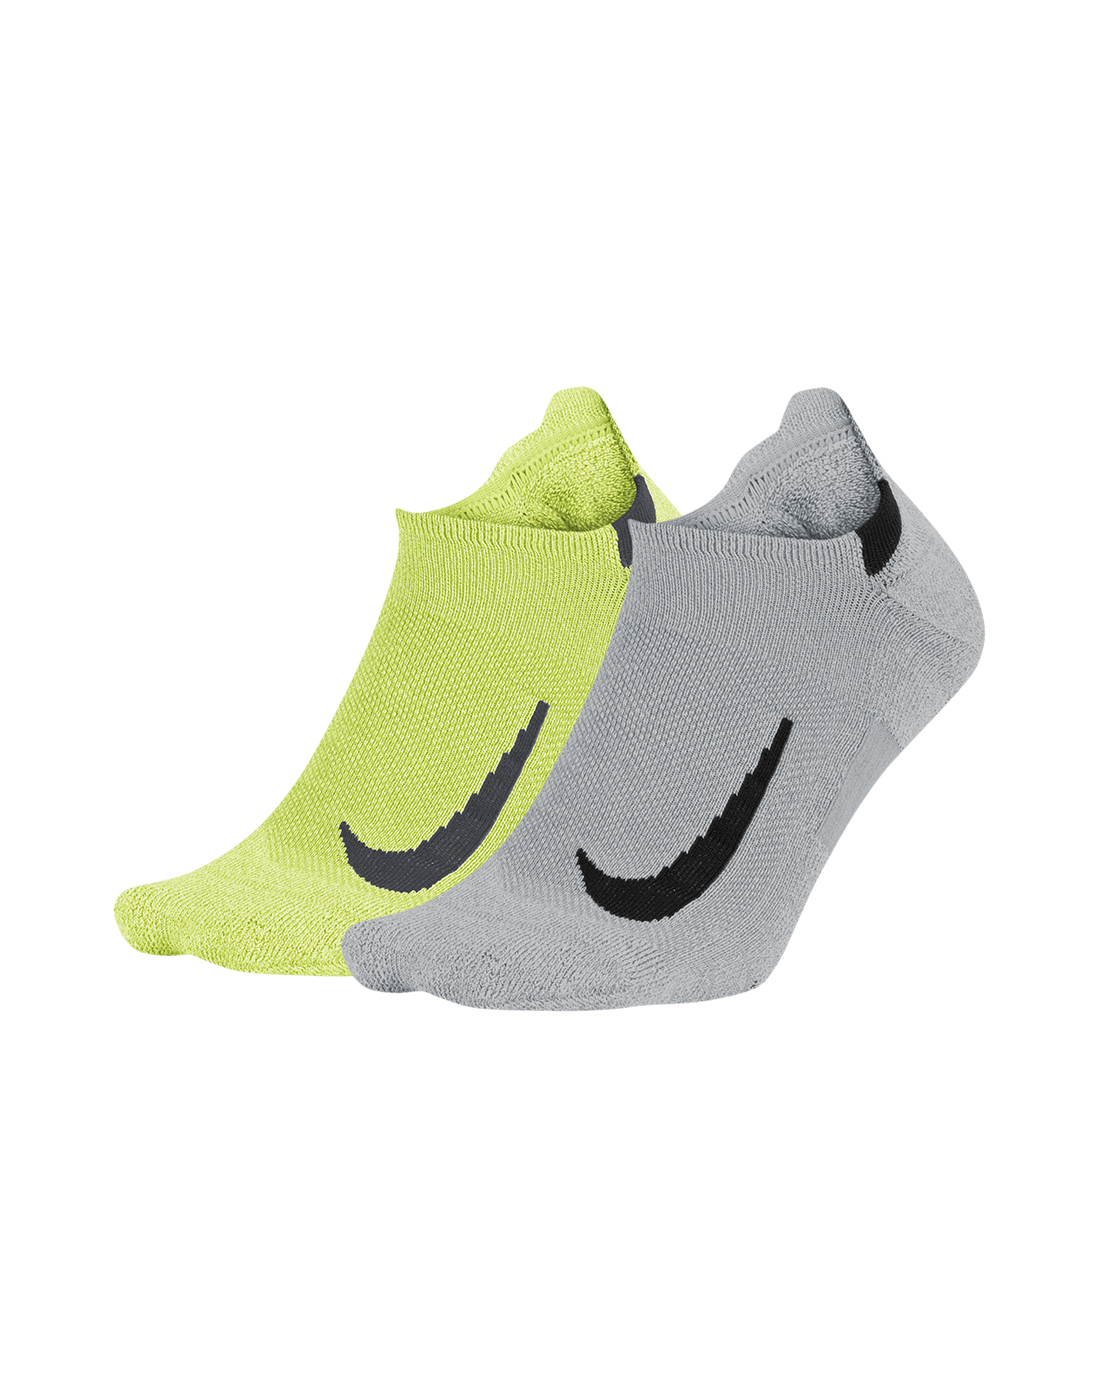 Nike Mens Running No Show 2 Pack Socks - Yellow | Life Style Sports IE